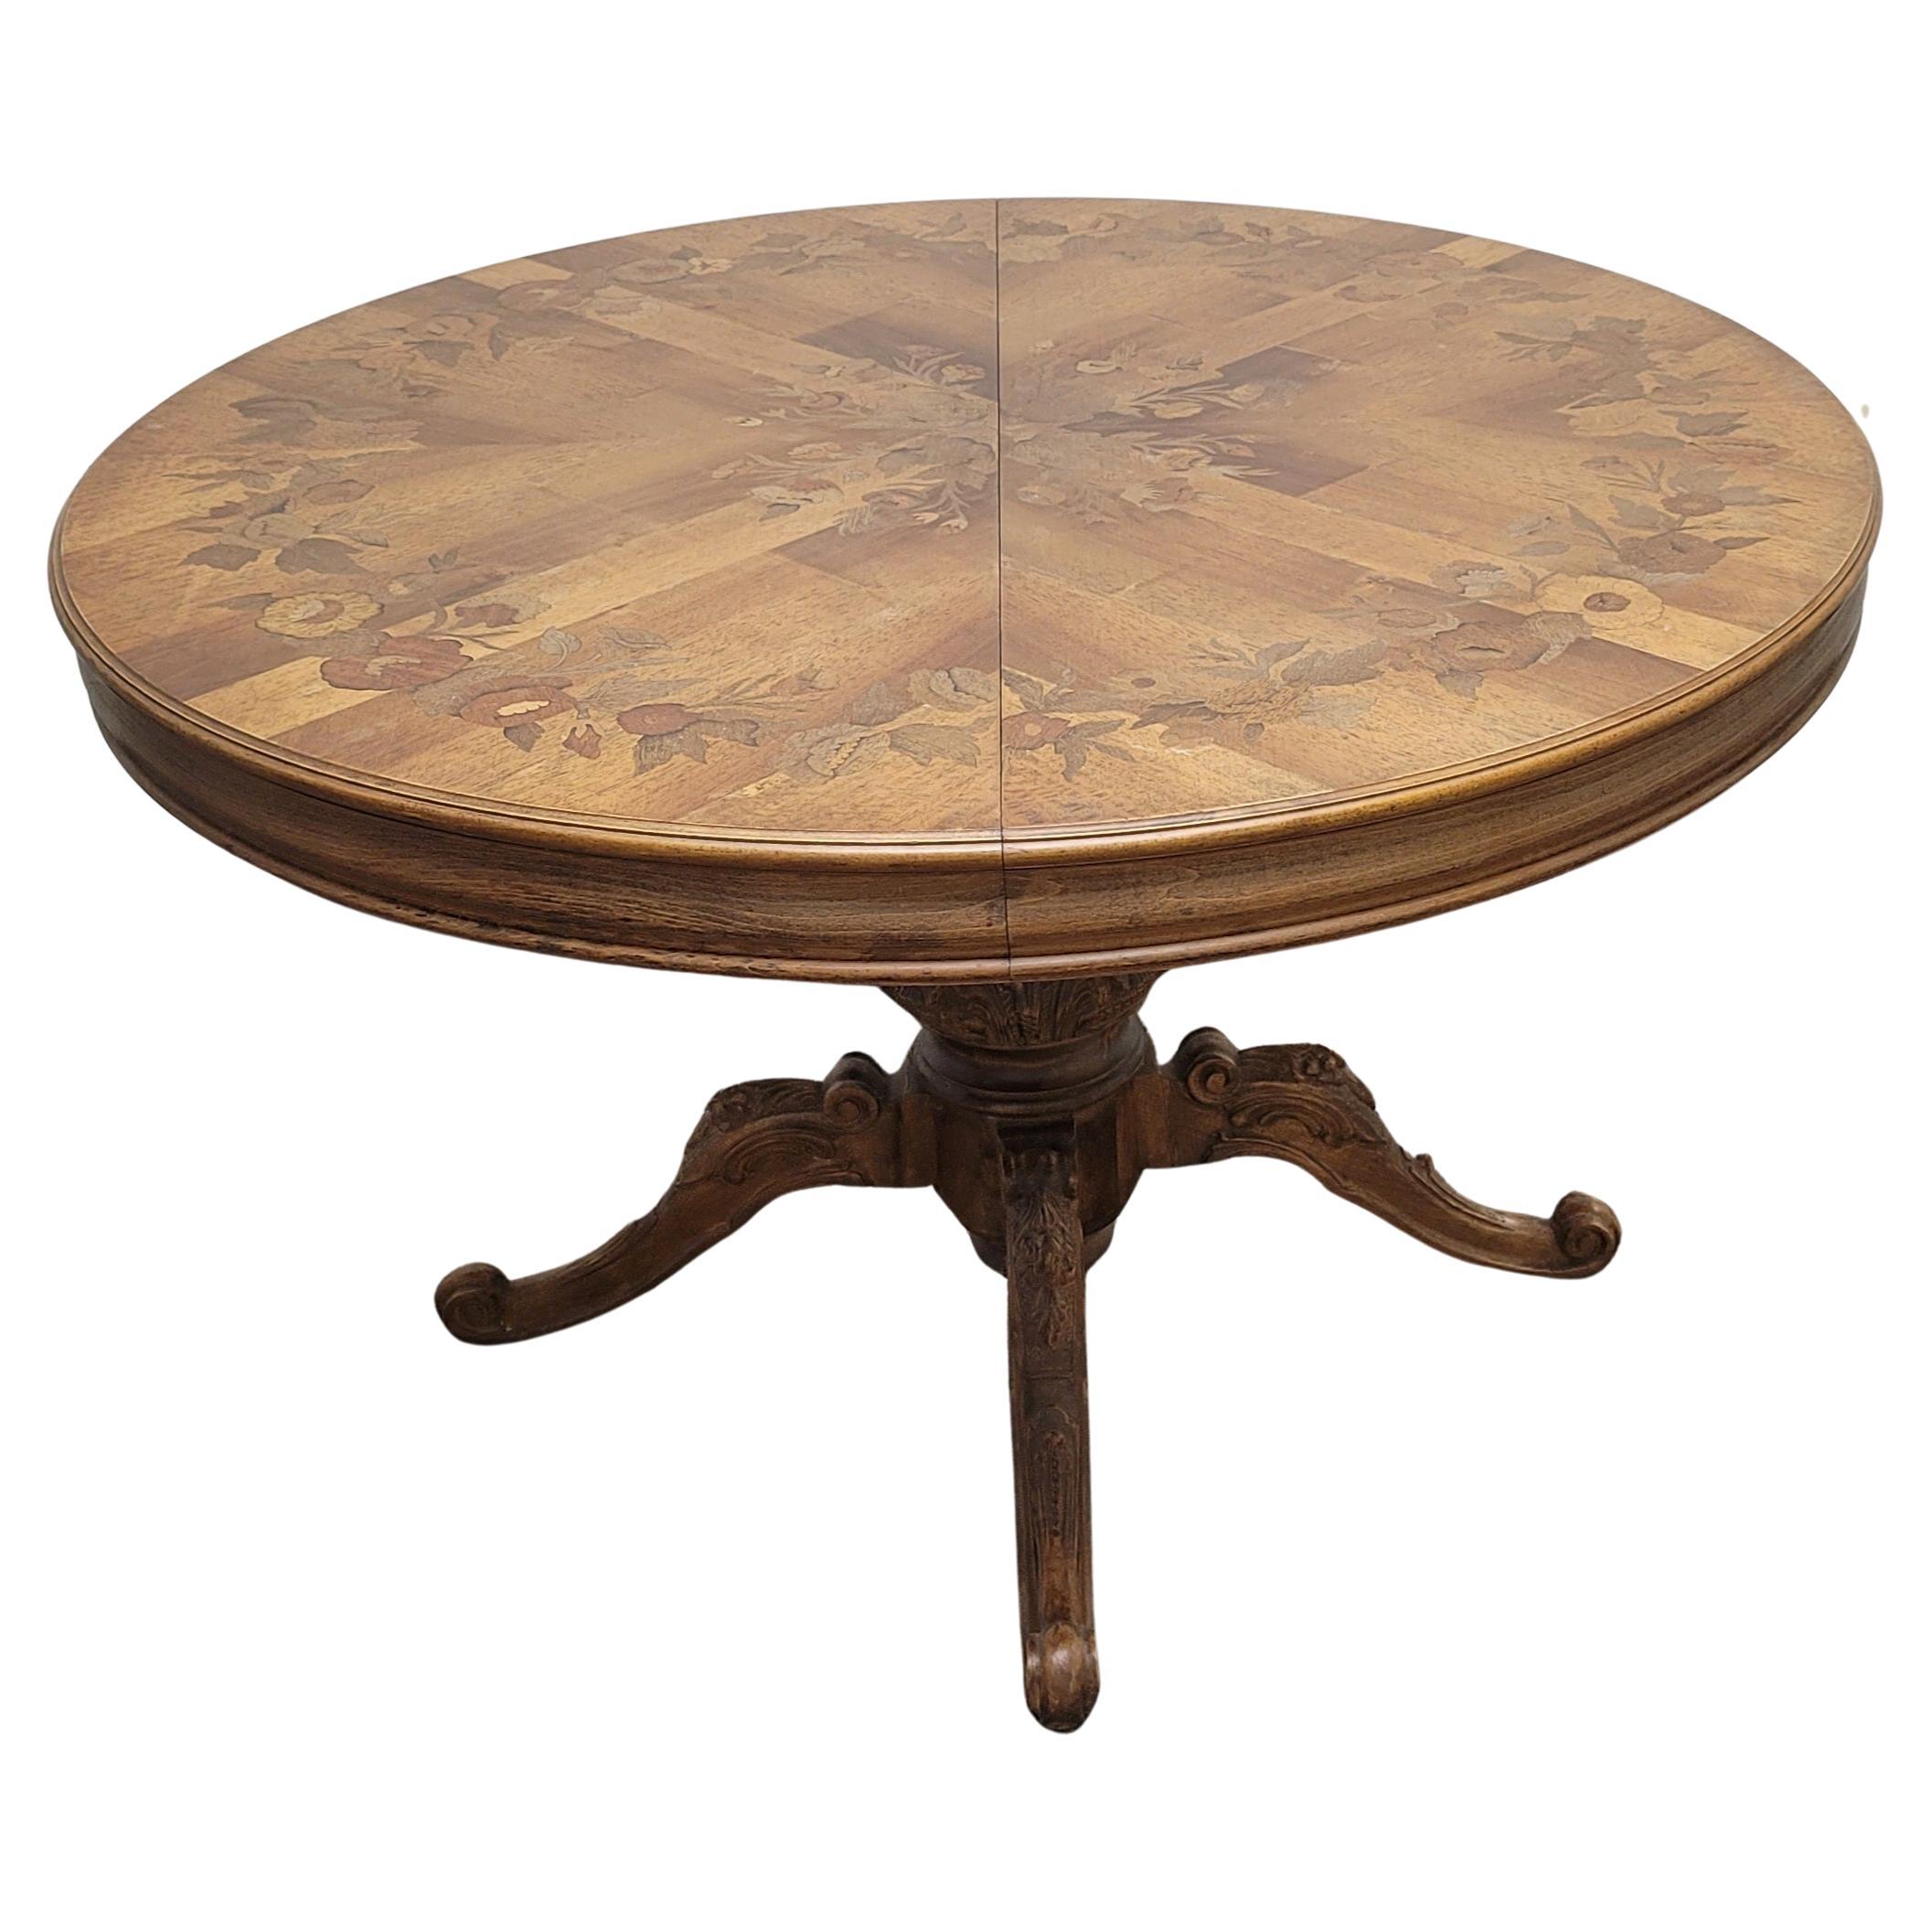 A beautiful French made Provincial marquetry mixed fruitwood Inlaid pedestal oval or round breakfast / dining table in great condition. Pedestal with amazing hand carvings over four (4) equally carved feet. Shows great. Intricate marquetry work on